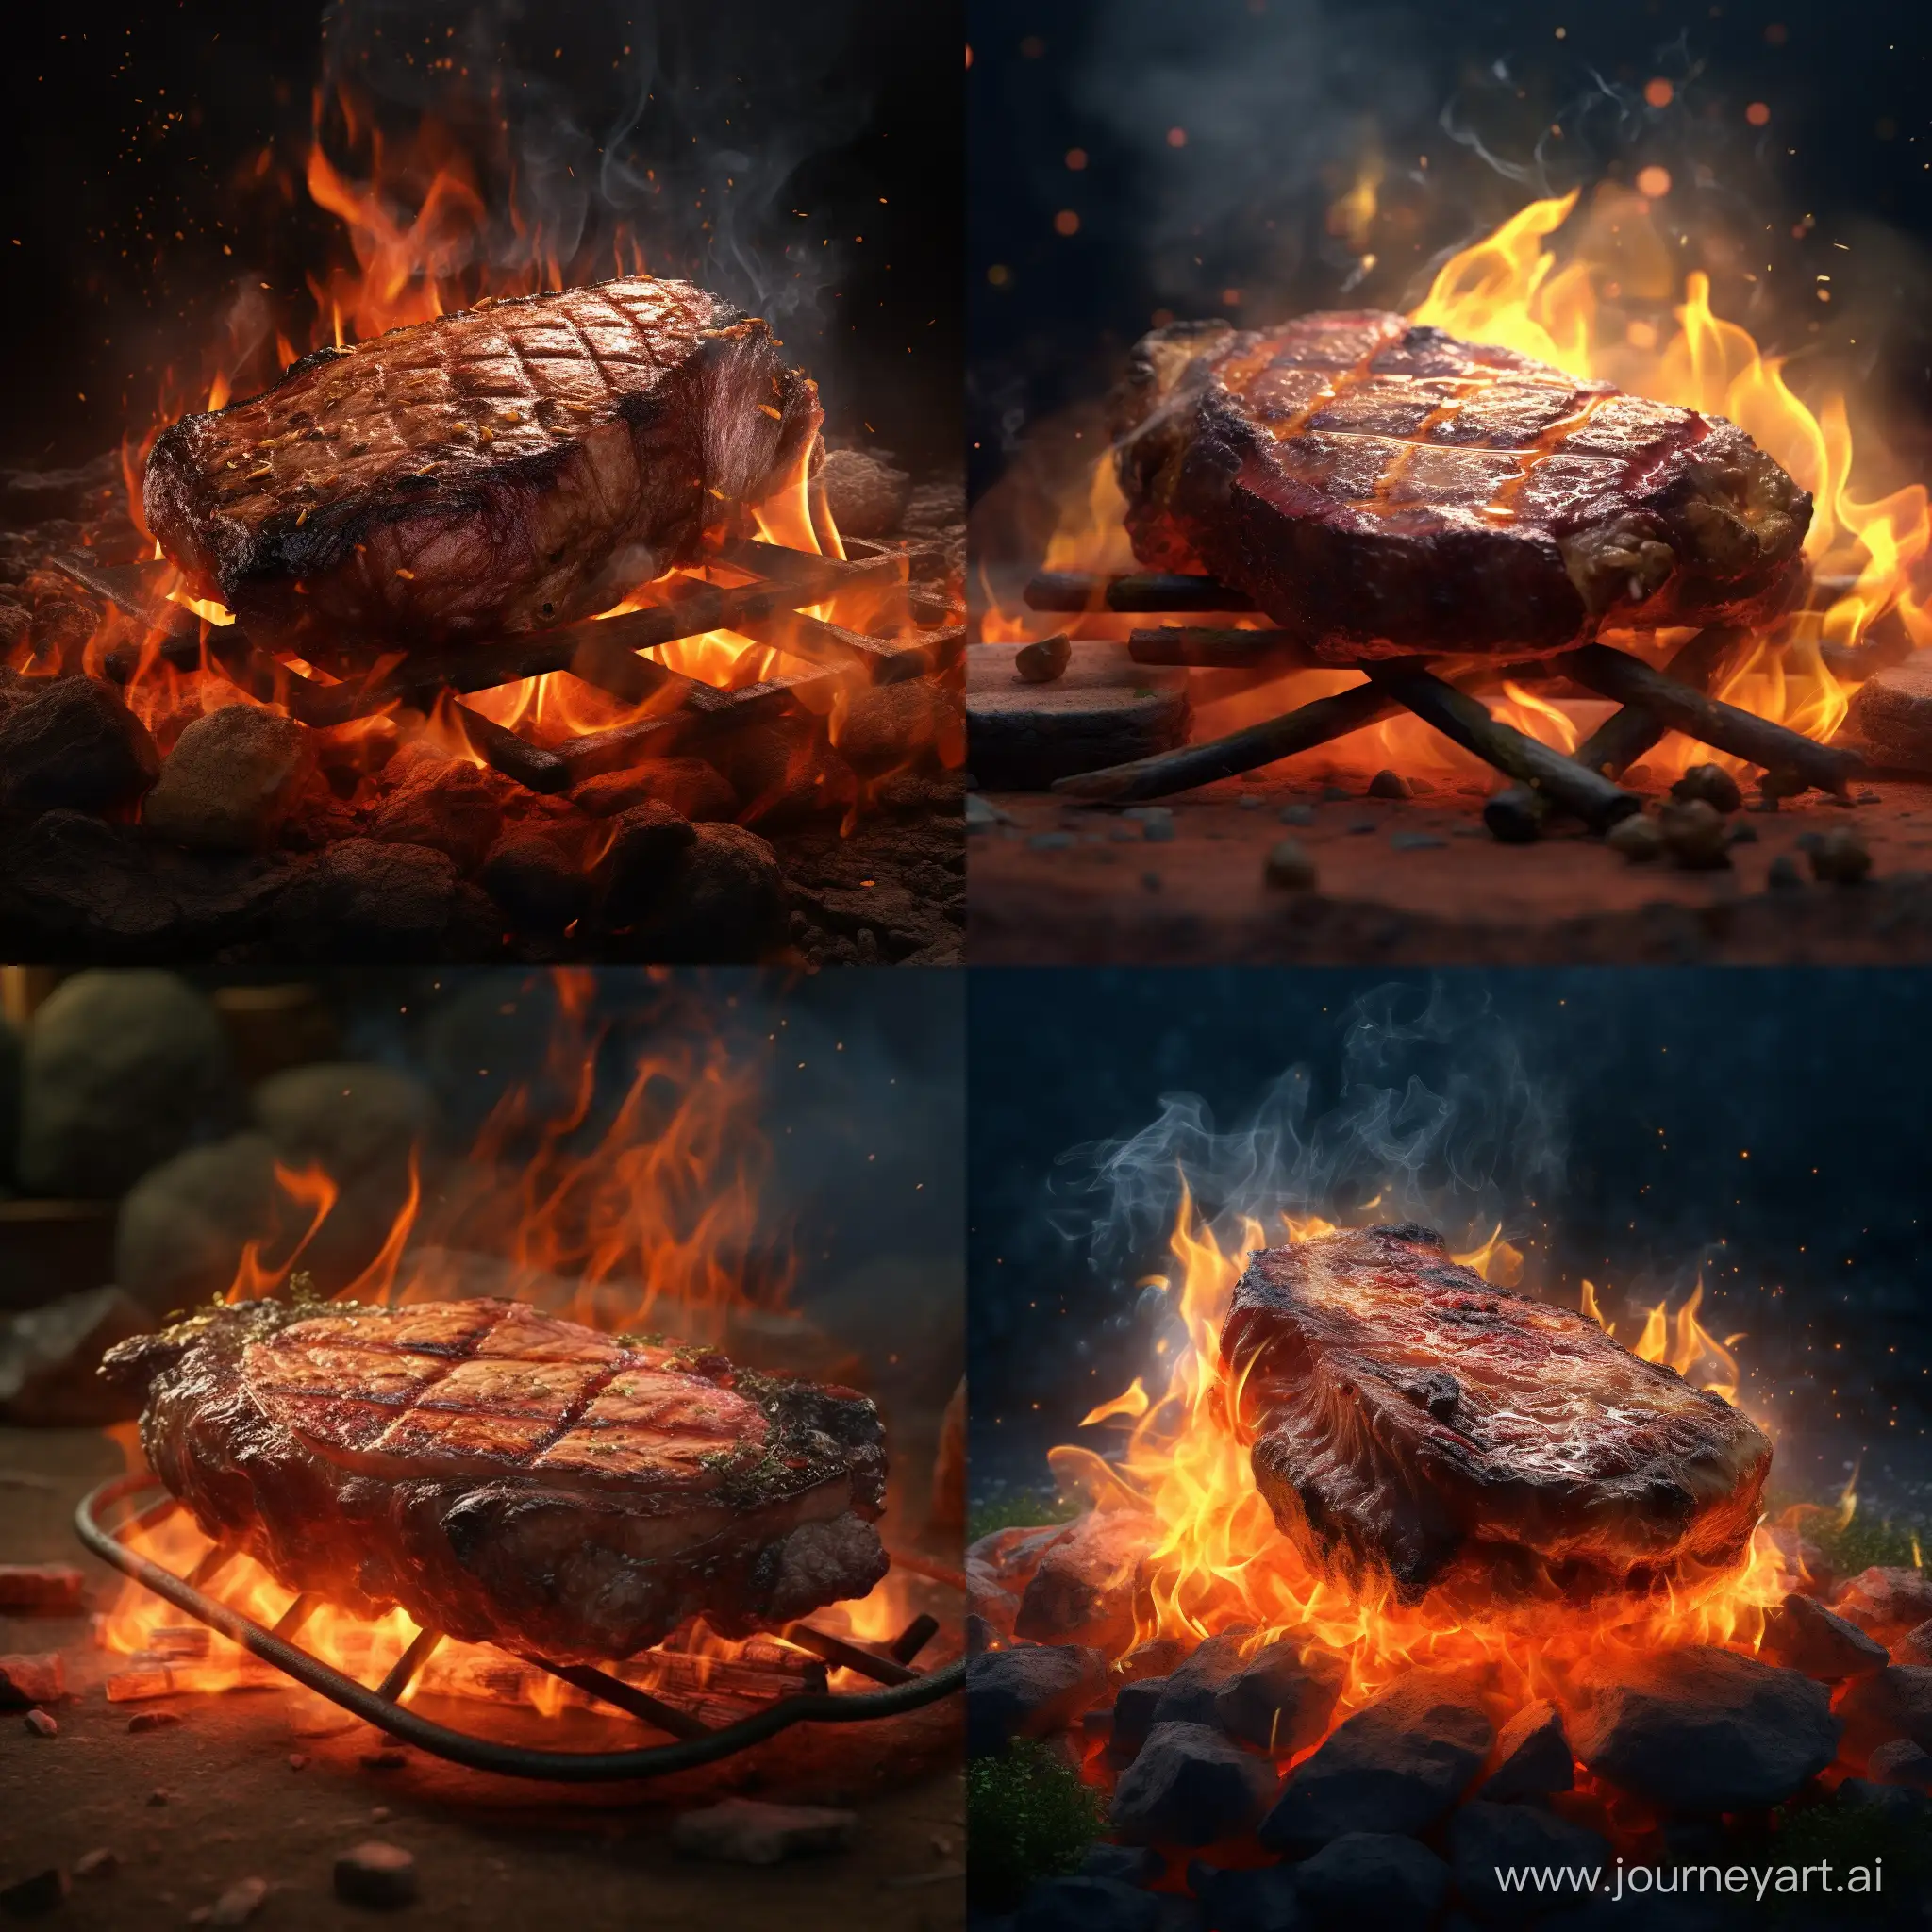 Sizzling-3D-Animation-Succulent-Meat-Grilling-Over-an-Open-Flame